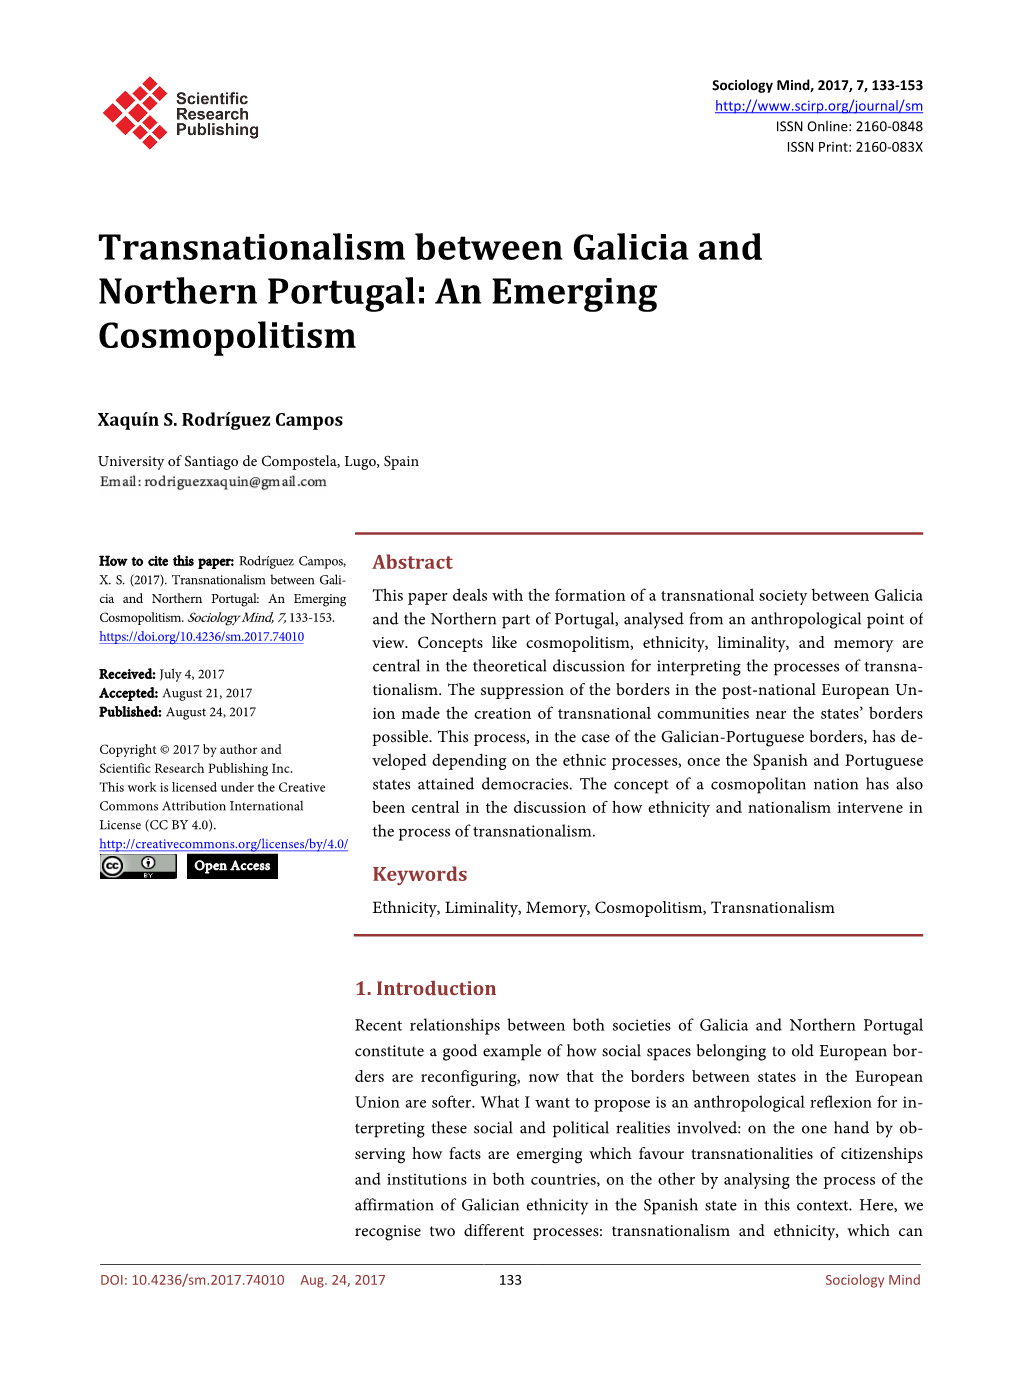 Transnationalism Between Galicia and Northern Portugal: an Emerging Cosmopolitism